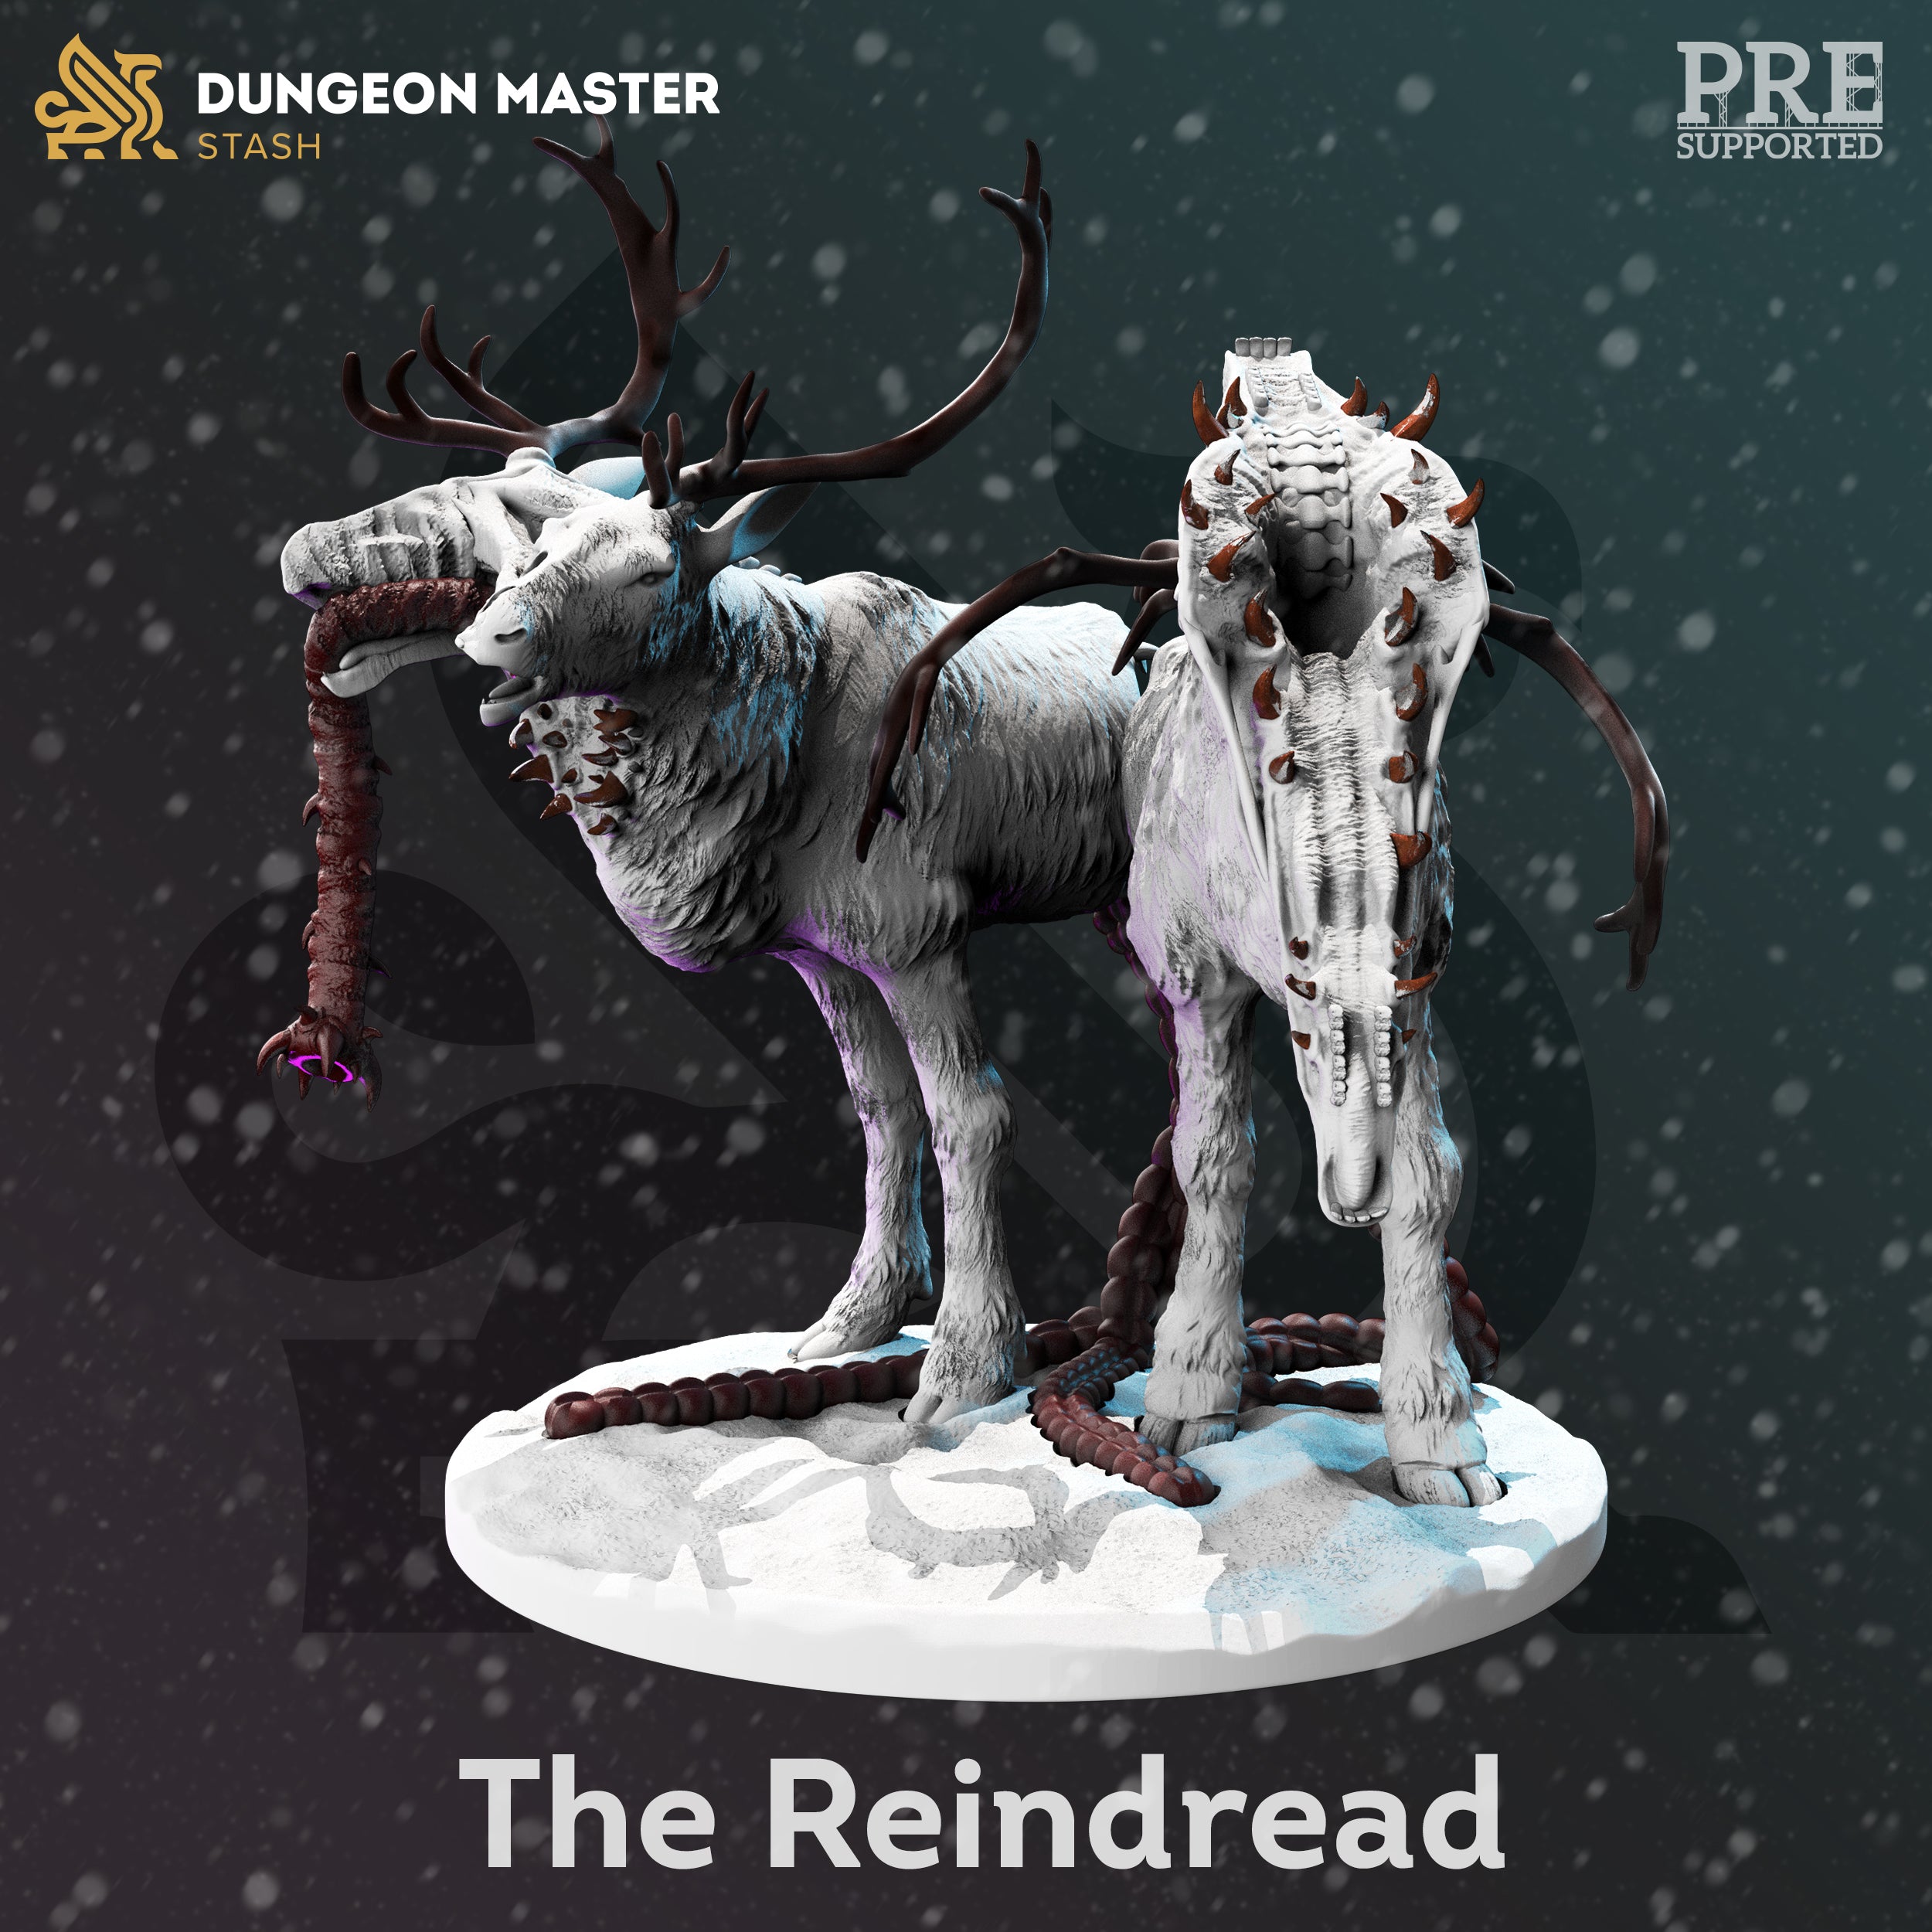 The Reindread